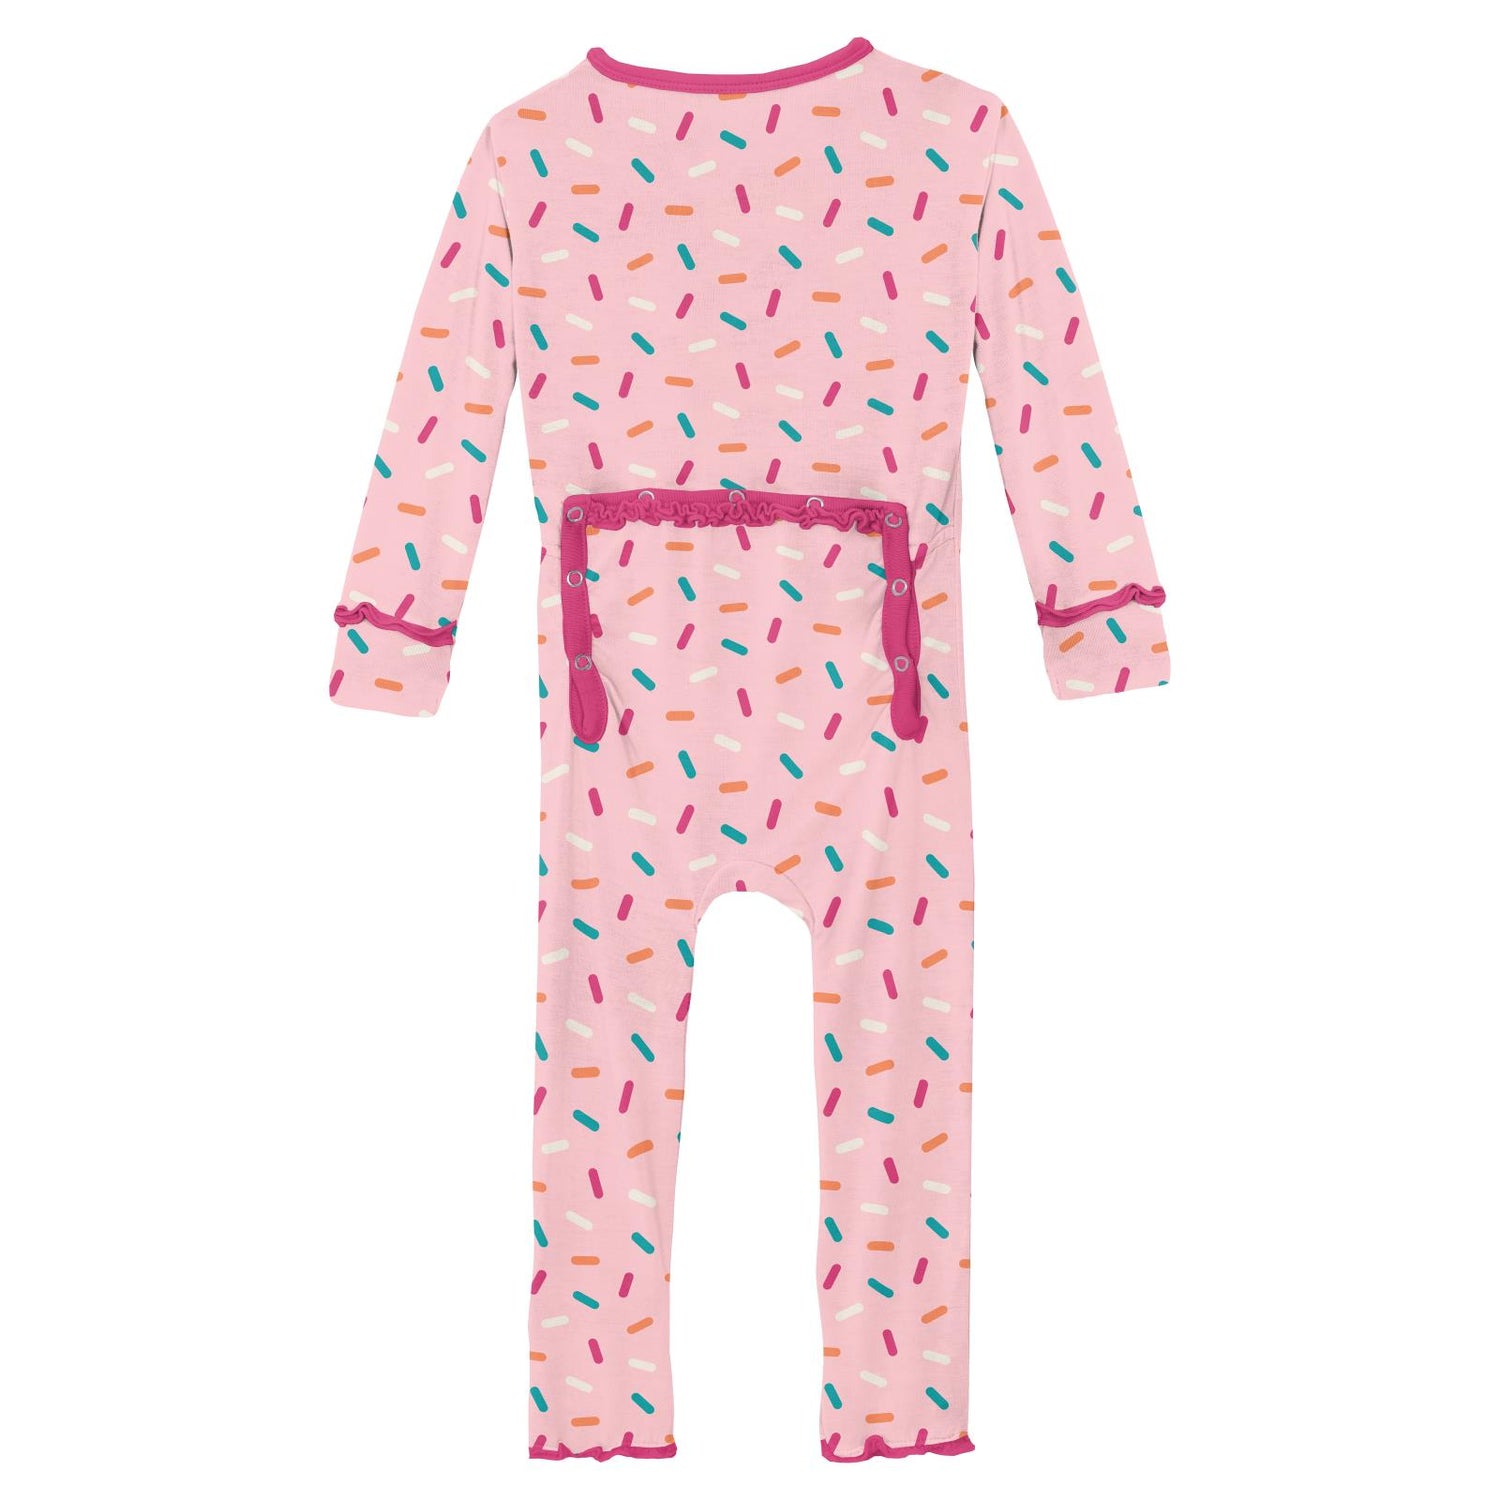 Print Muffin Ruffle Coverall with 2 Way Zipper in Lotus Sprinkles